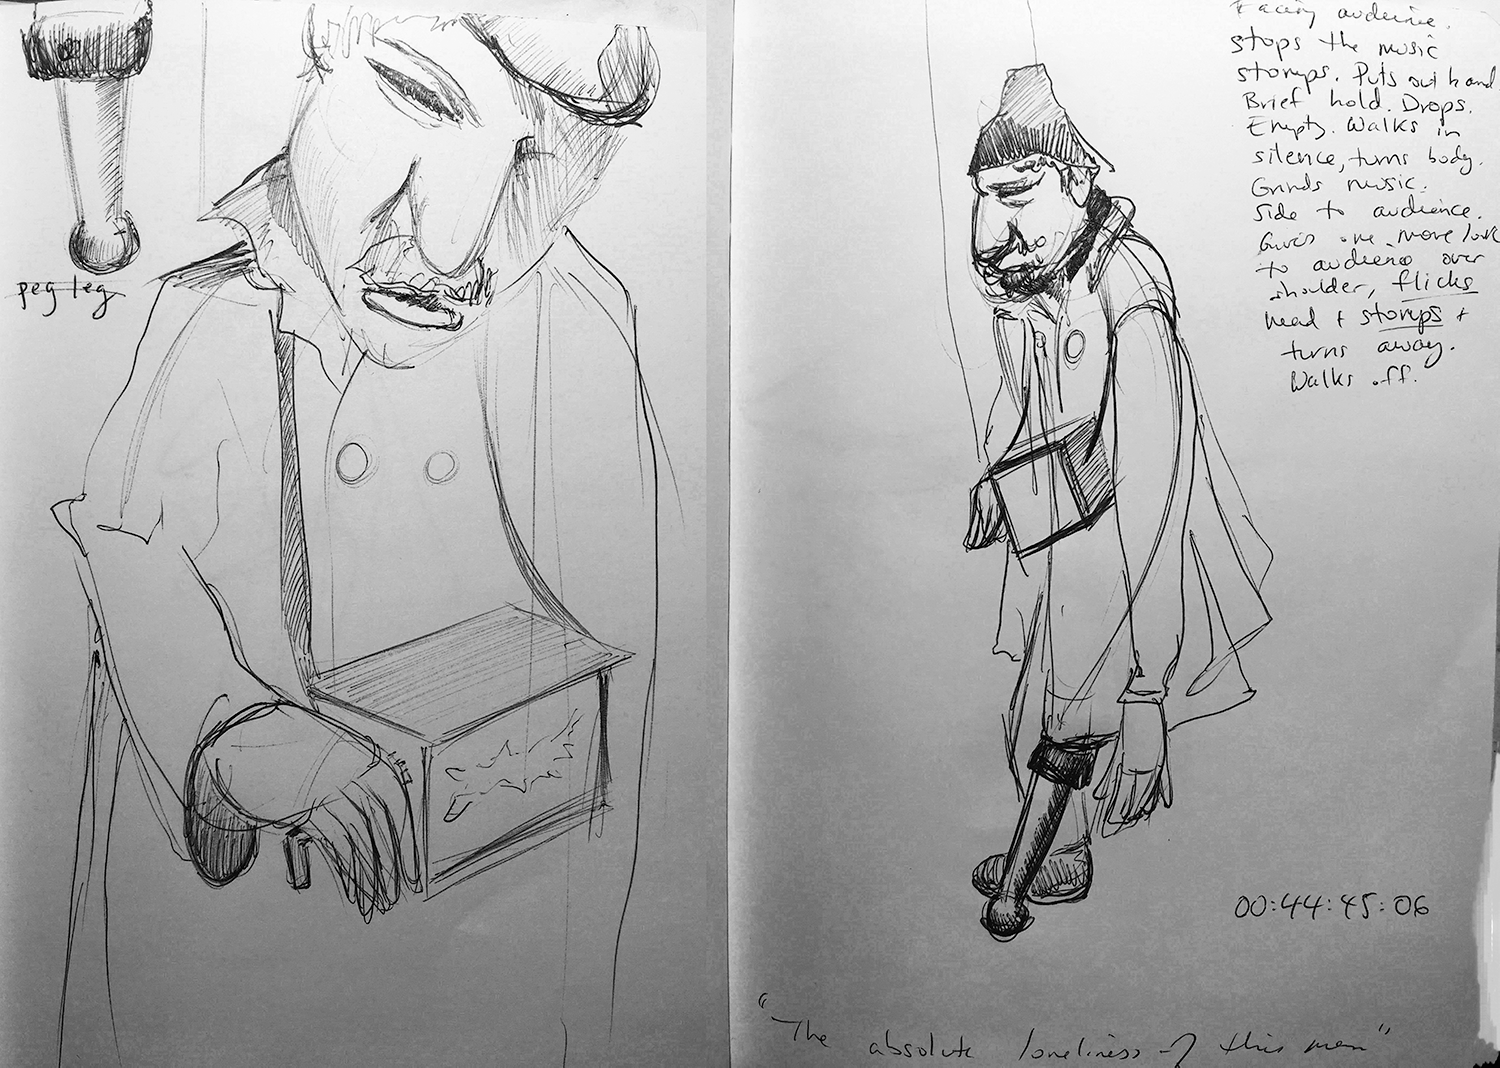 Two black pen drawings on white paper. On the left, a close-up of Albrecht Roser's marionette from the front. The face is cocked somewhat to the side and downwards, its eyes dark slits. It wears a hat, and the right hand is on the handle of the music box hanging on the puppets neck. On the top left corner of the page the puppets peg-leg is drawn and labeled. On the right of the page, a full-body sketch of the puppet is shown. The puppet is fully in profile, looking to the viewers left, with the peg-leg rest